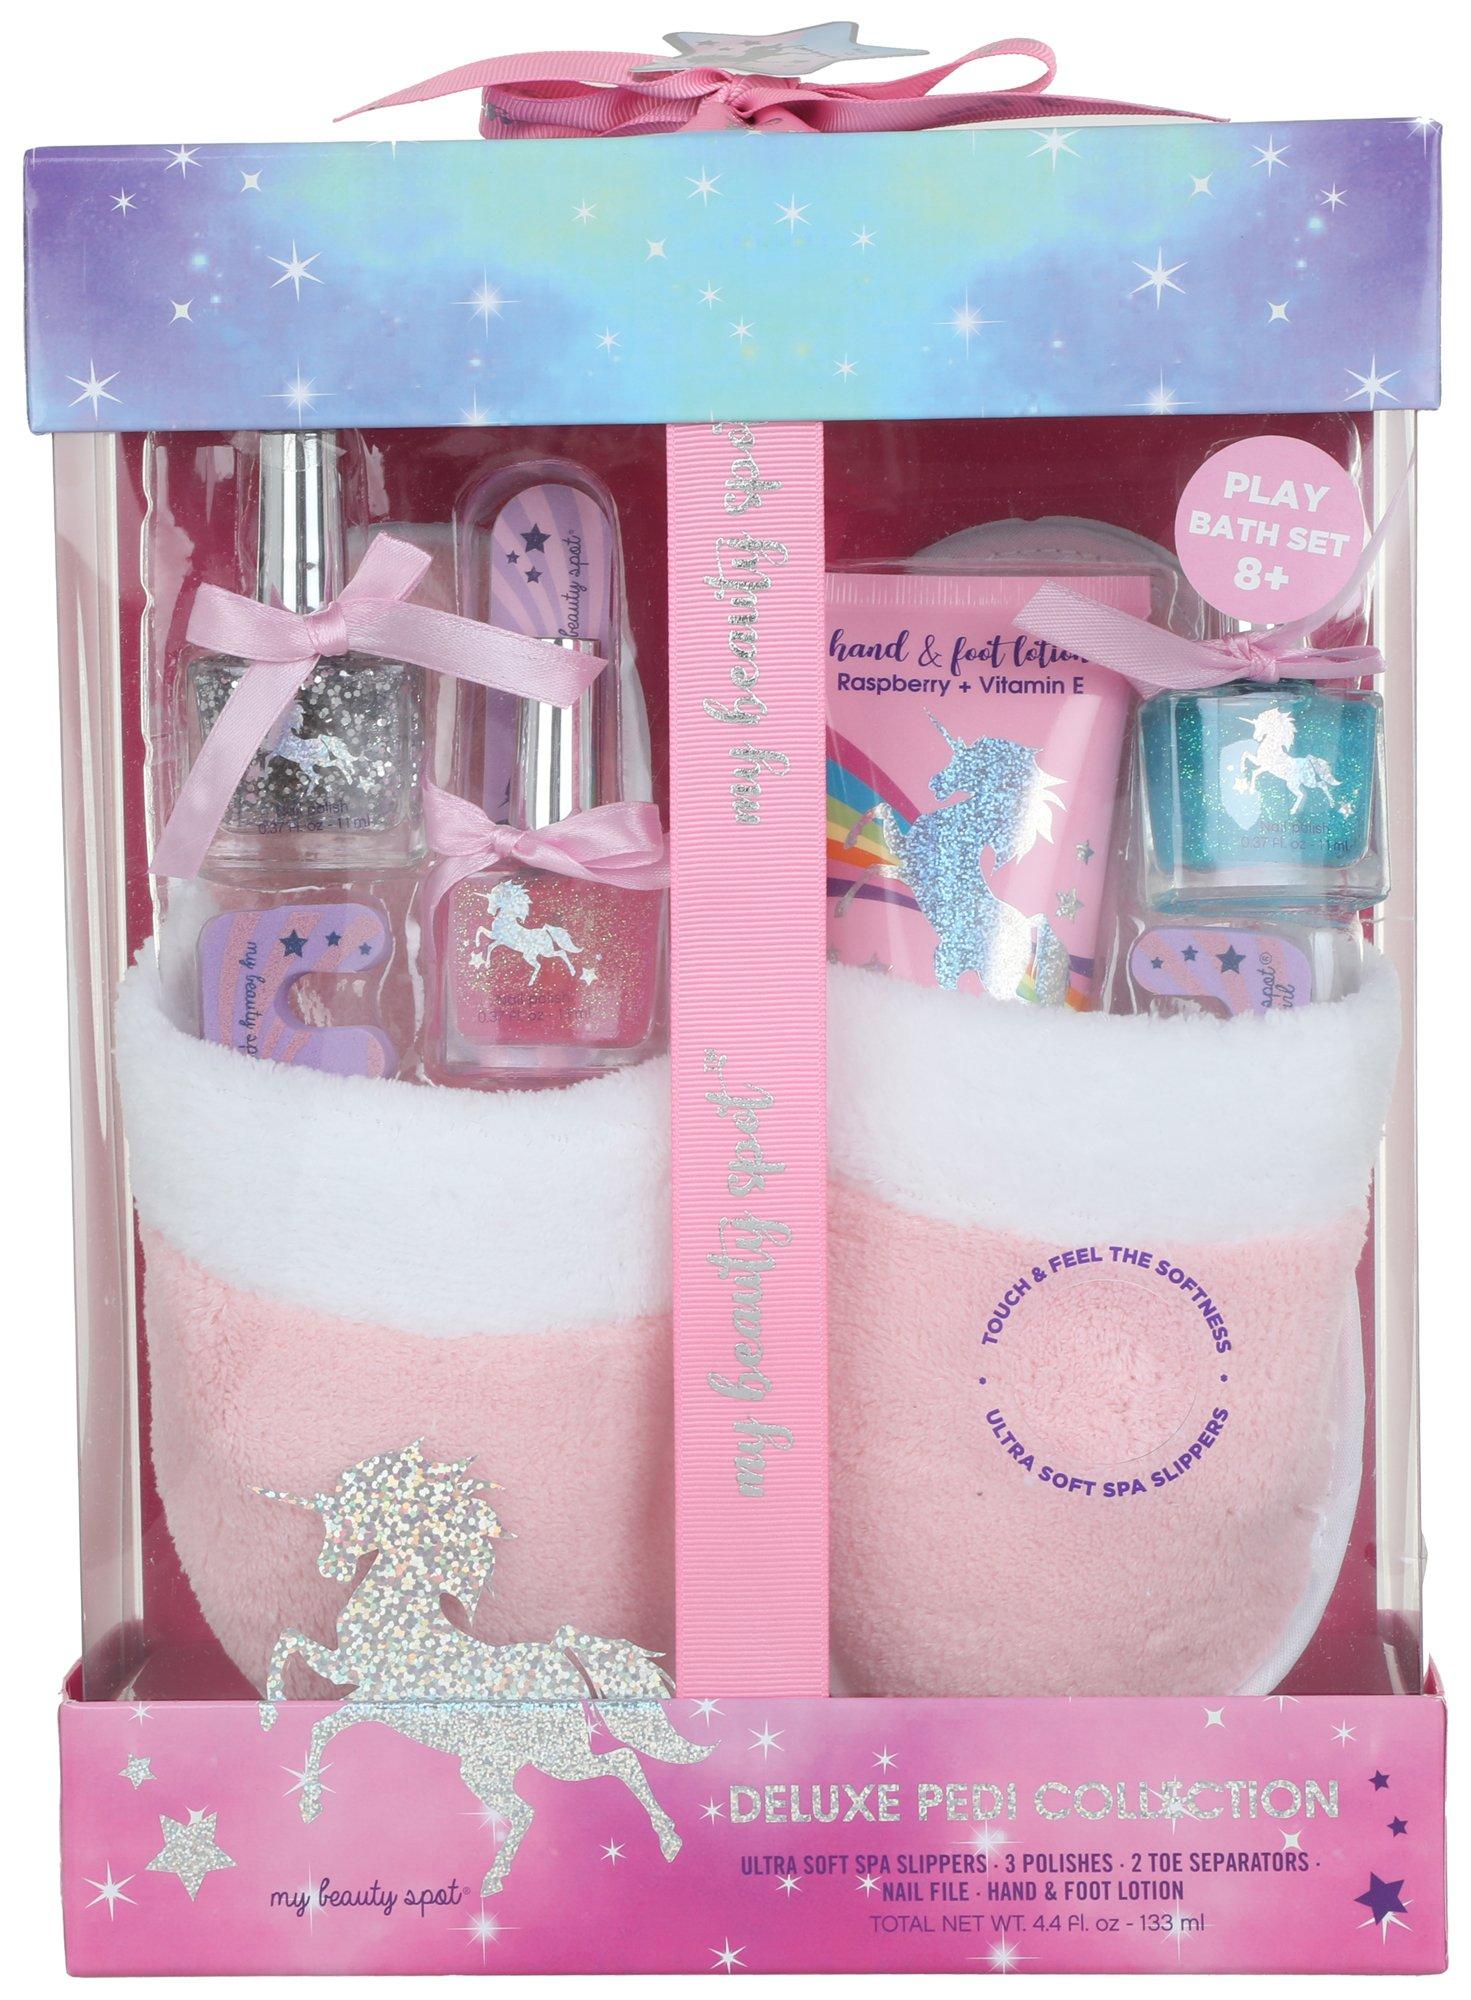 Girls Deluxe Pedicure Collection